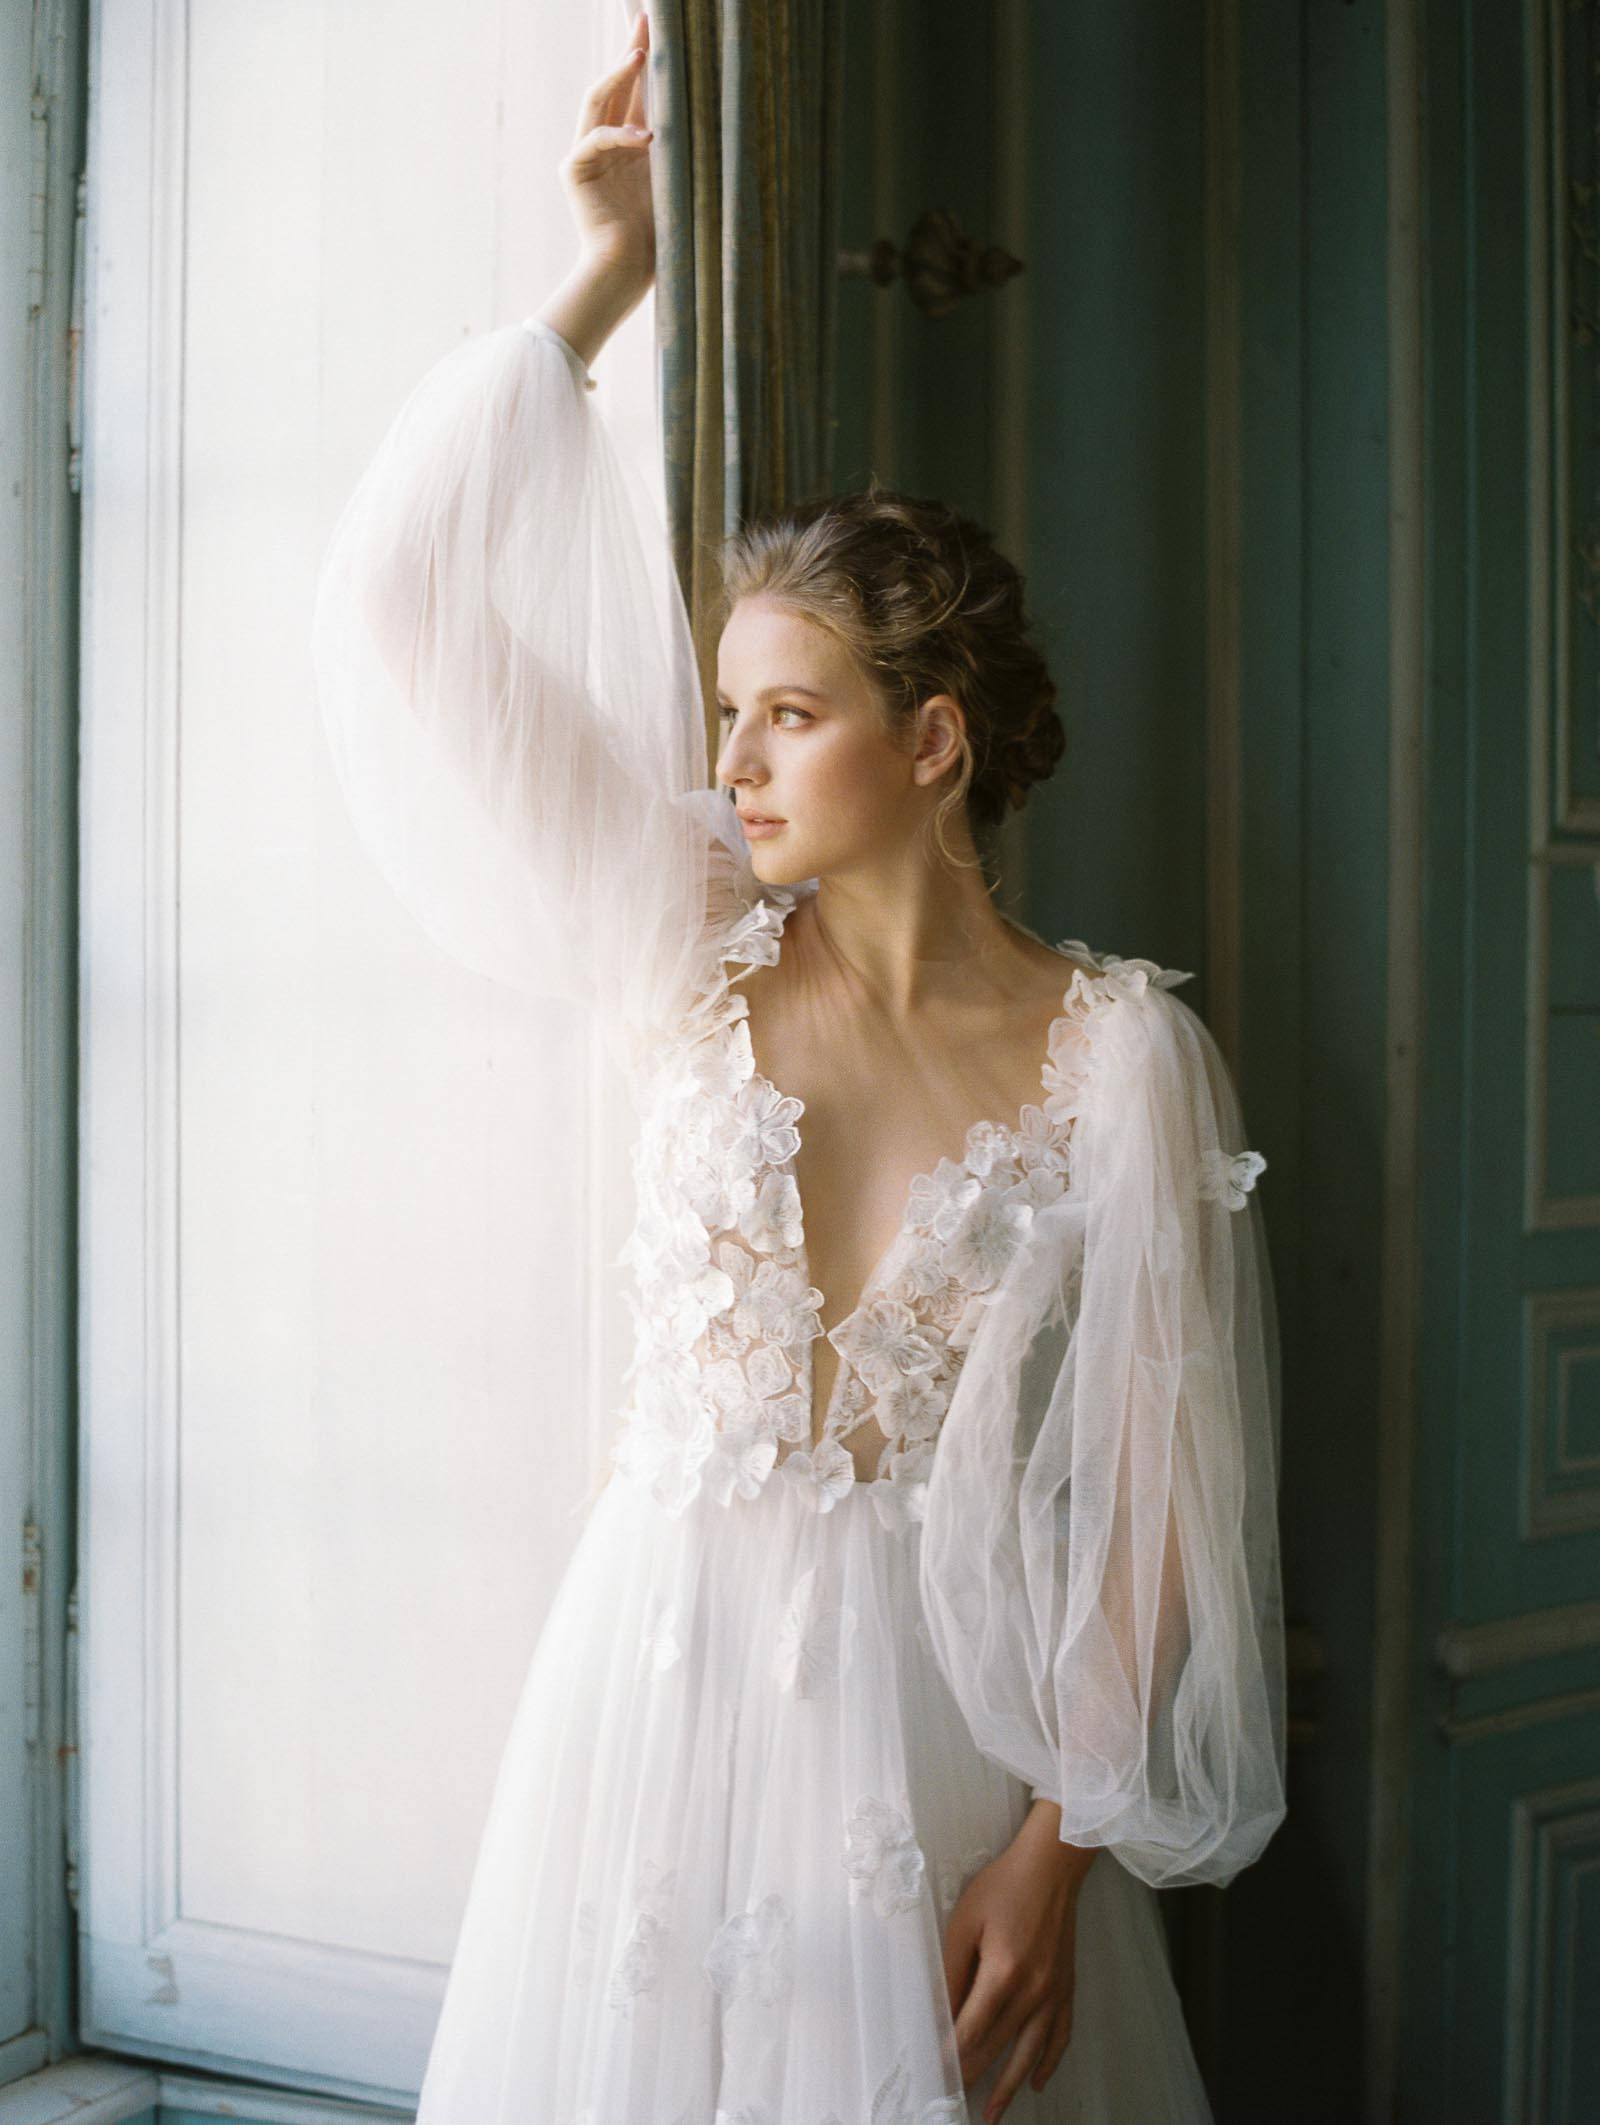 A Parisian Love Story with the most exquisite wedding gown | Paris ...